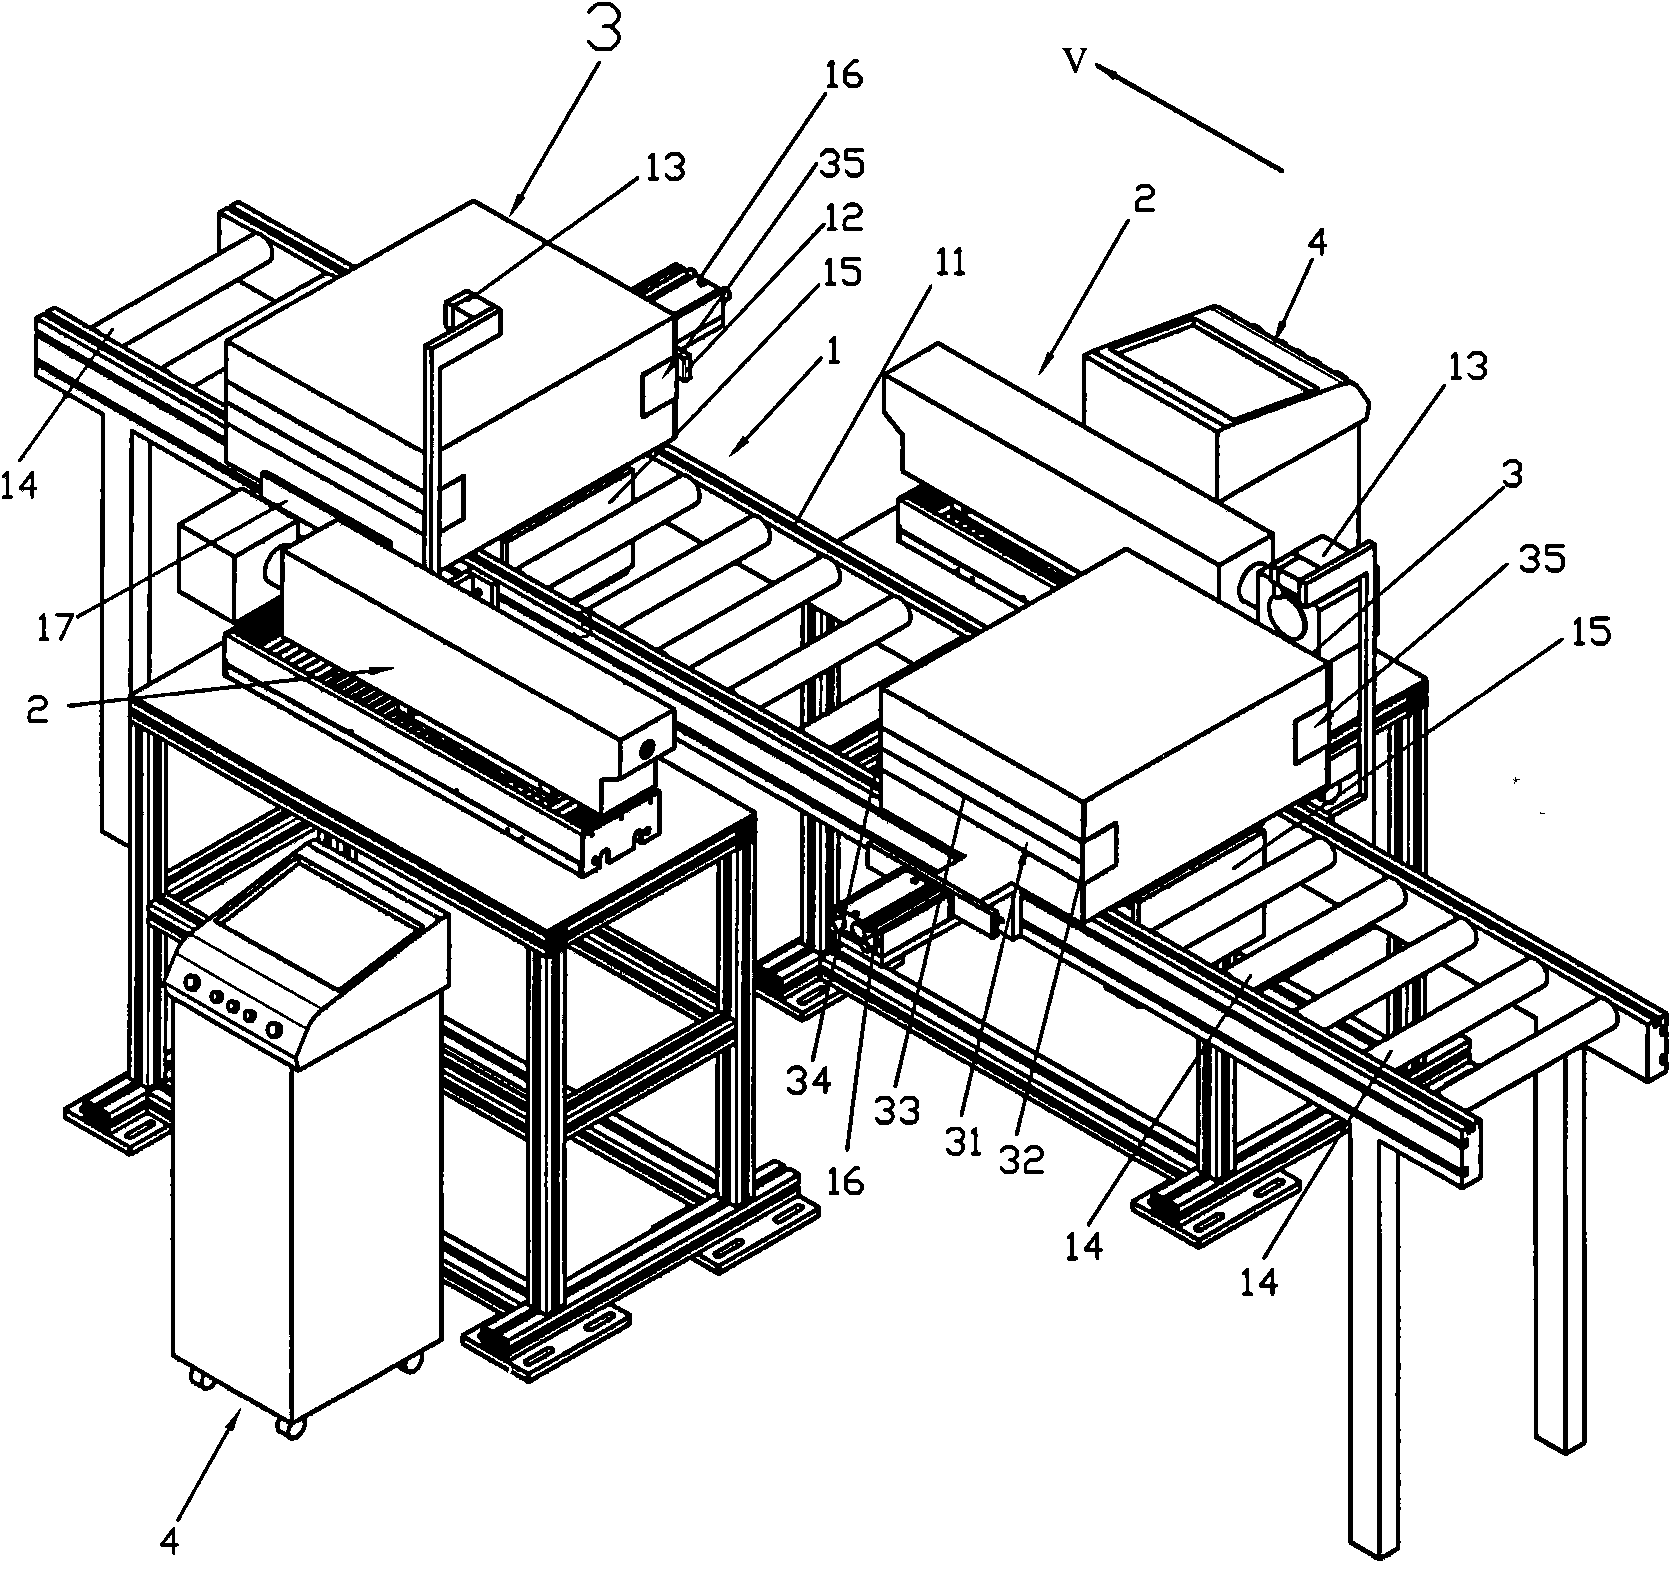 Method for opening box by cutting packing tape with laser